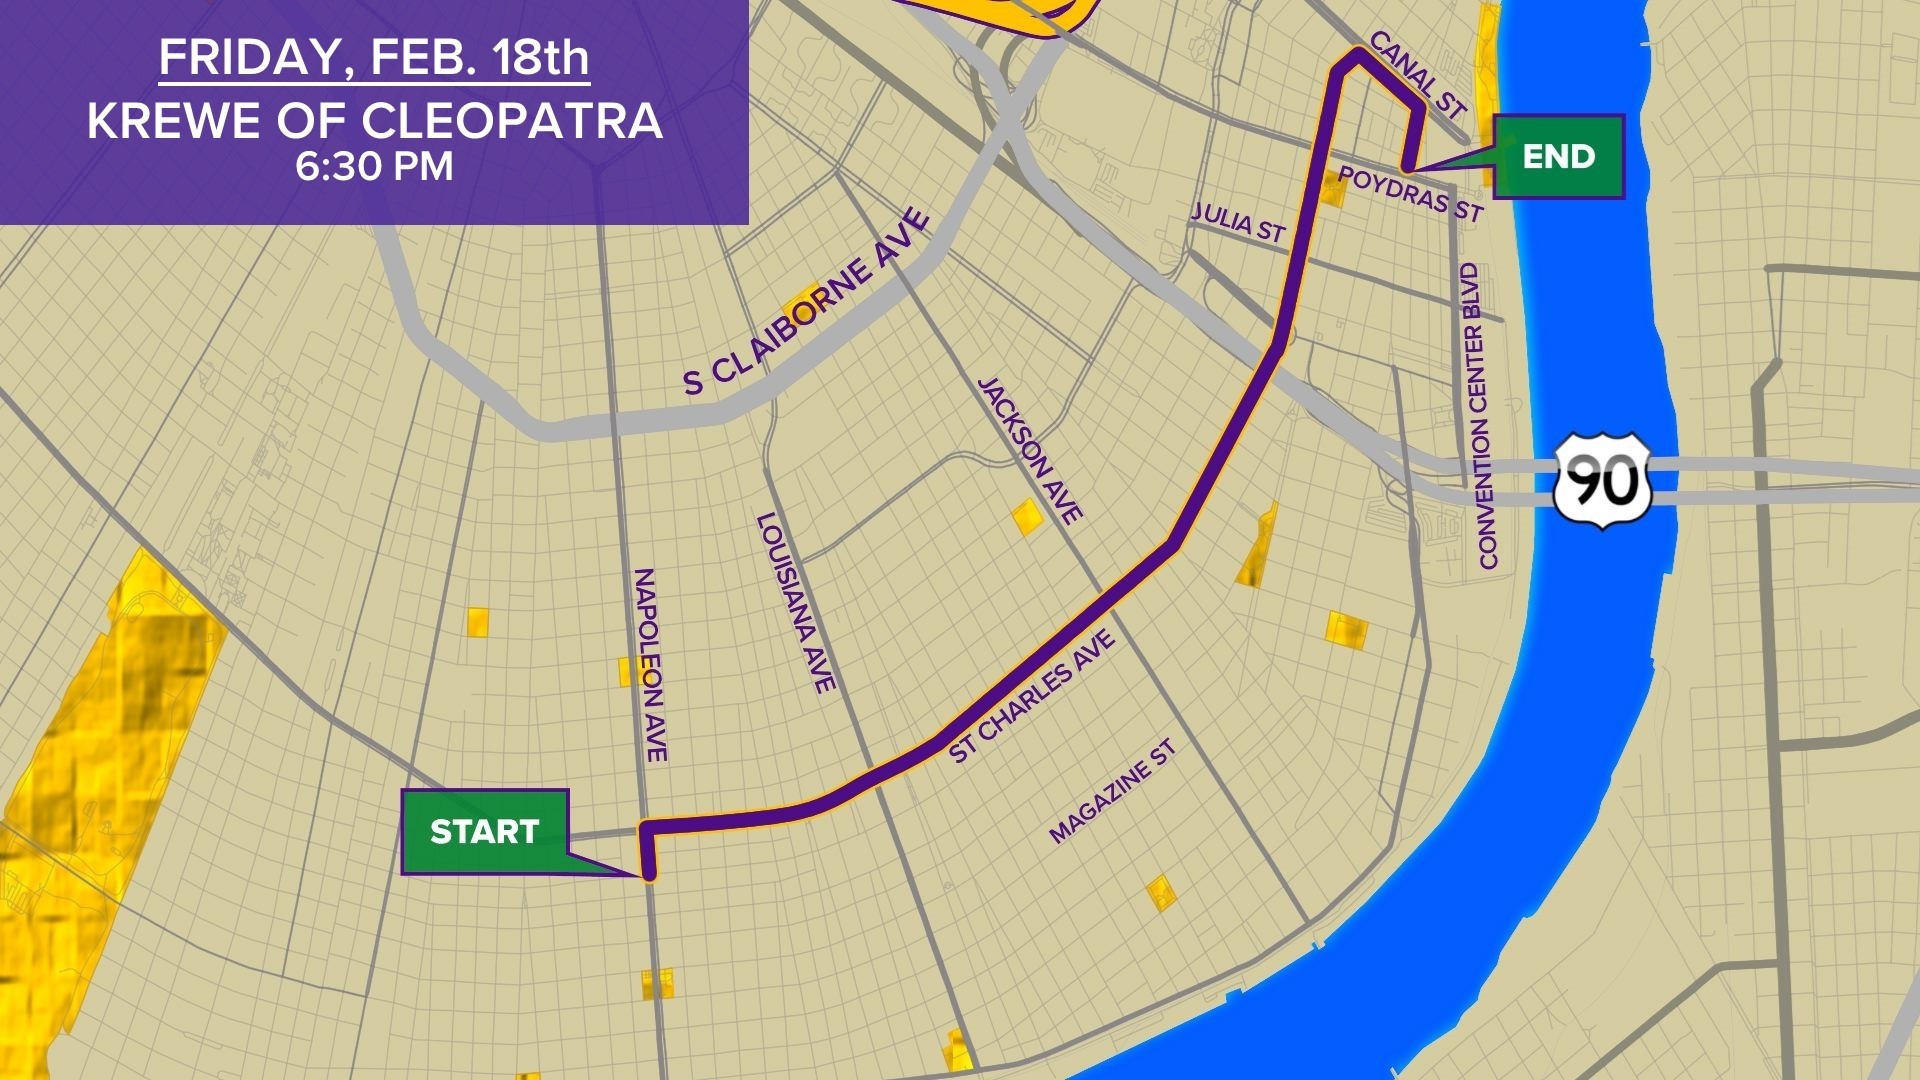 Krewe of Cleopatra Parade route, start time